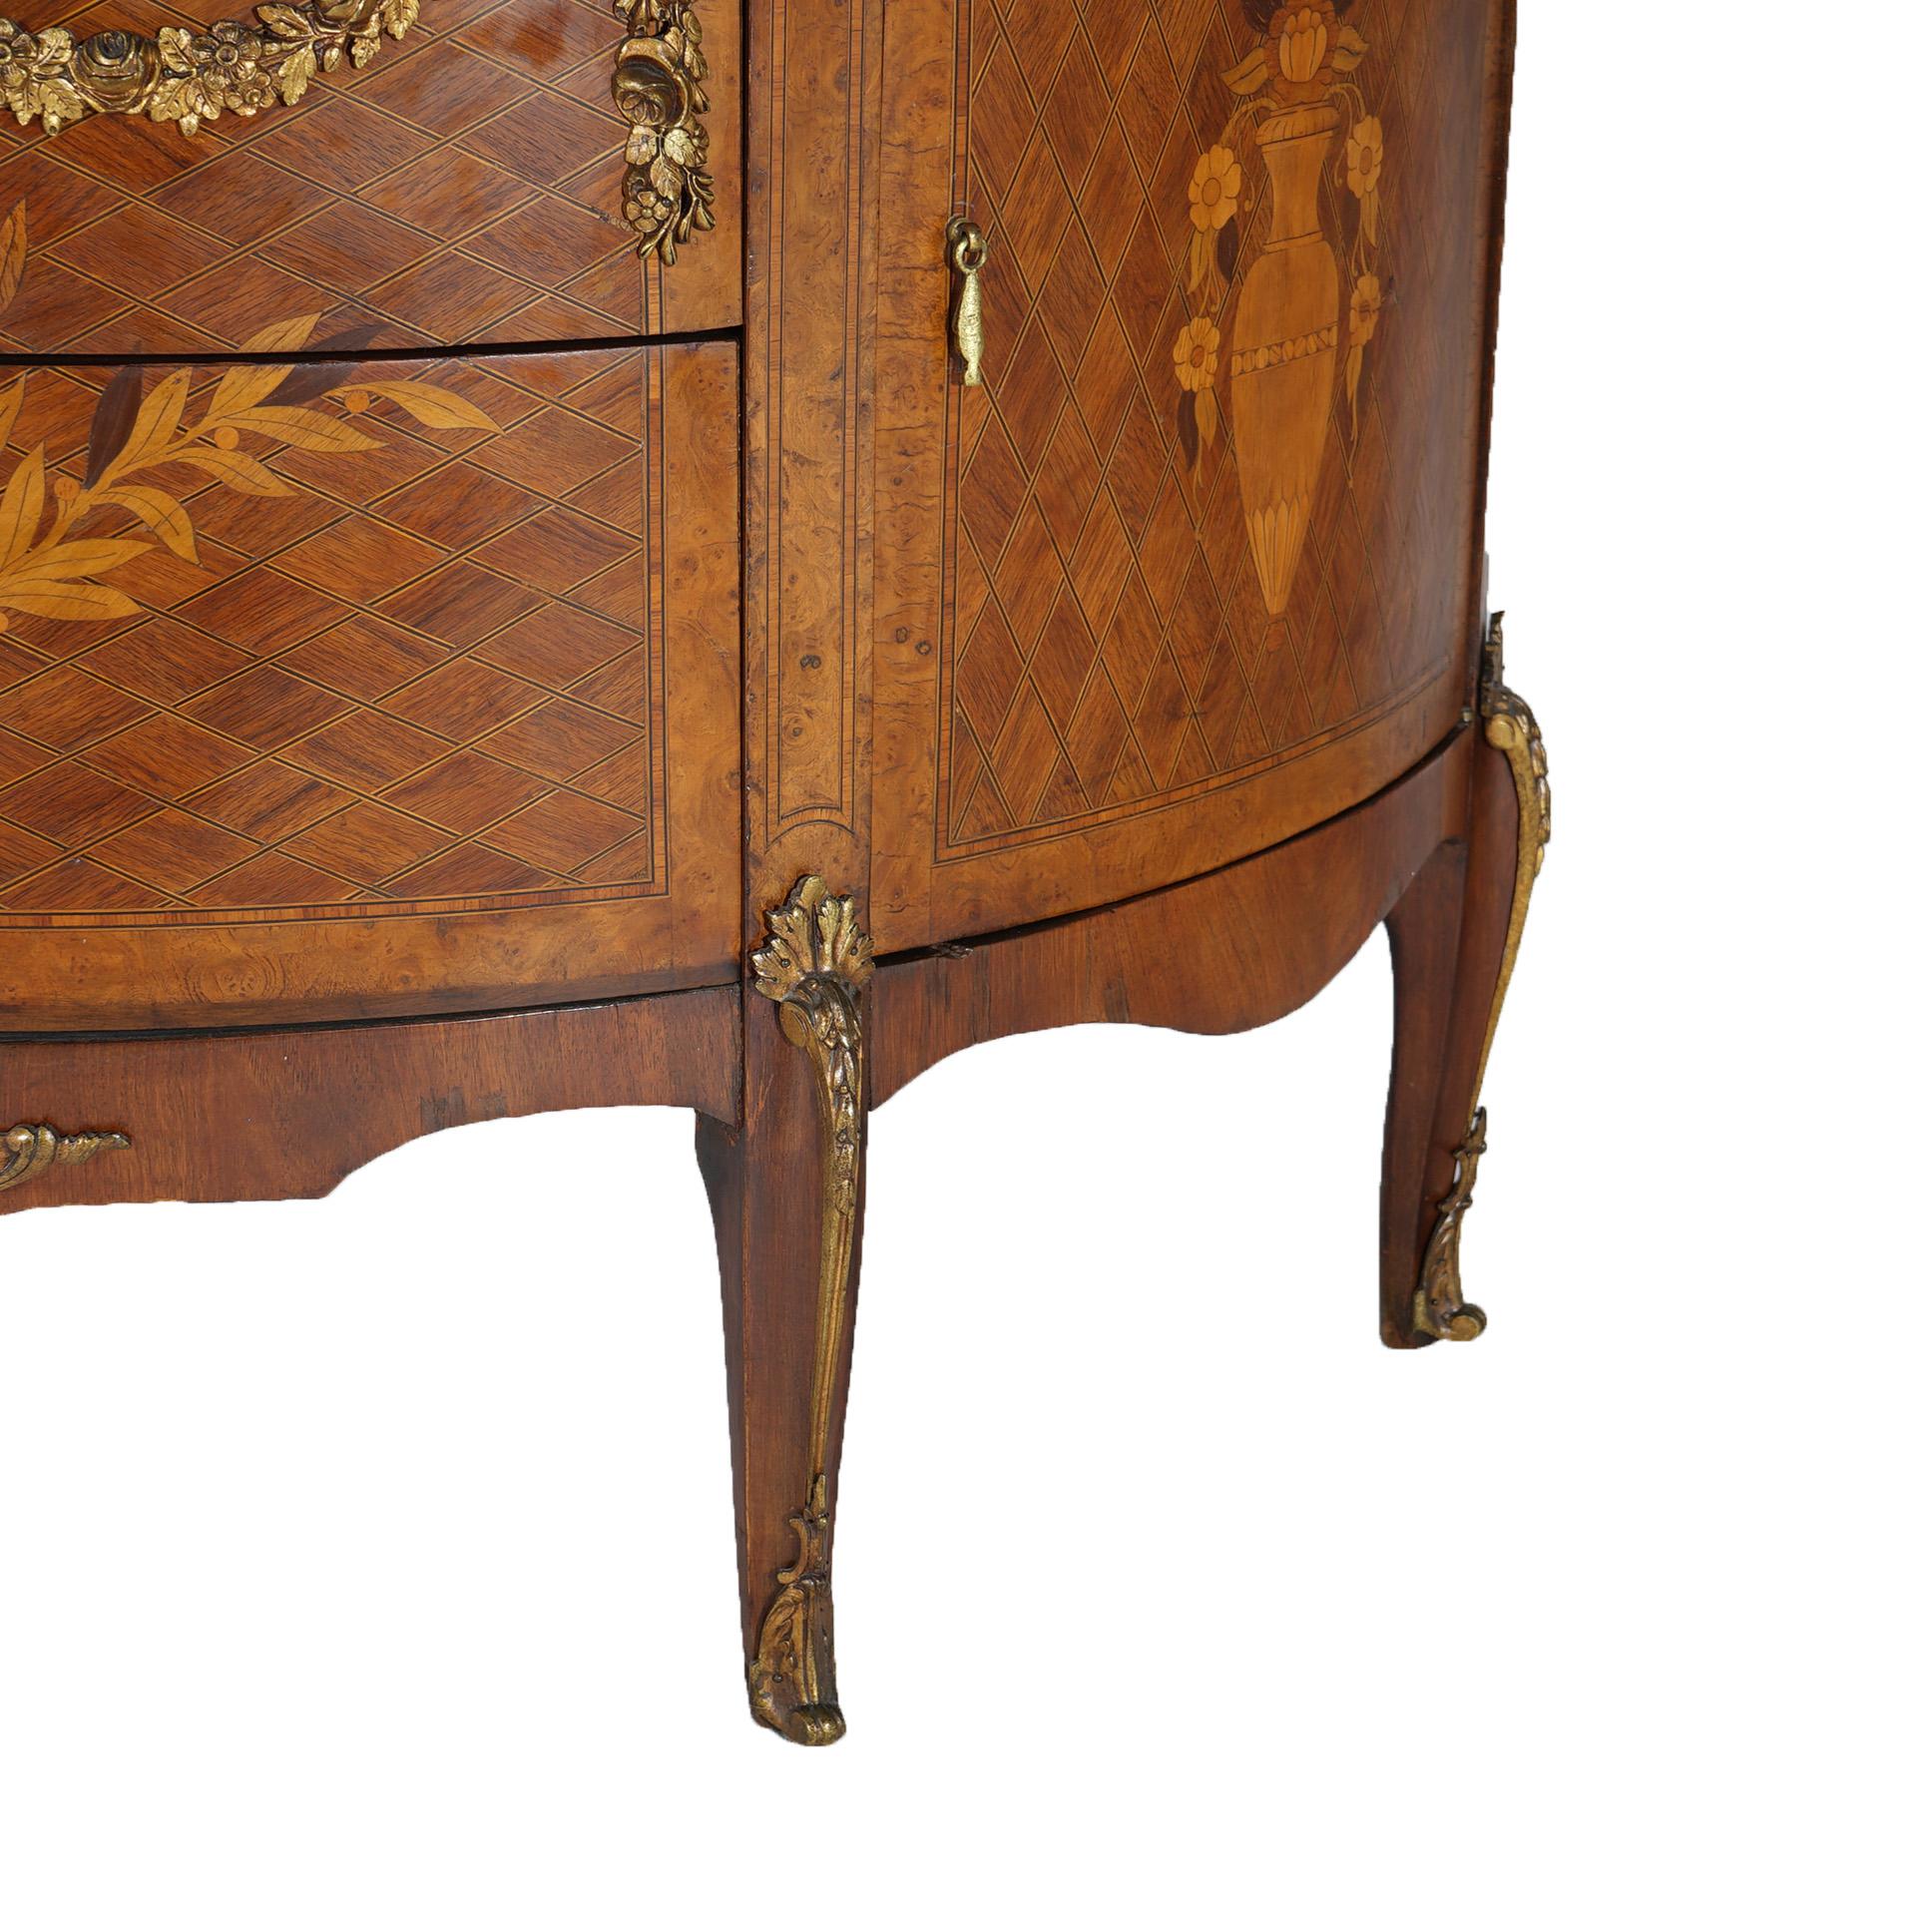 Antique French Louis XVI Kingwood Marquetry & Marble Console by Blanchet c1870 For Sale 15